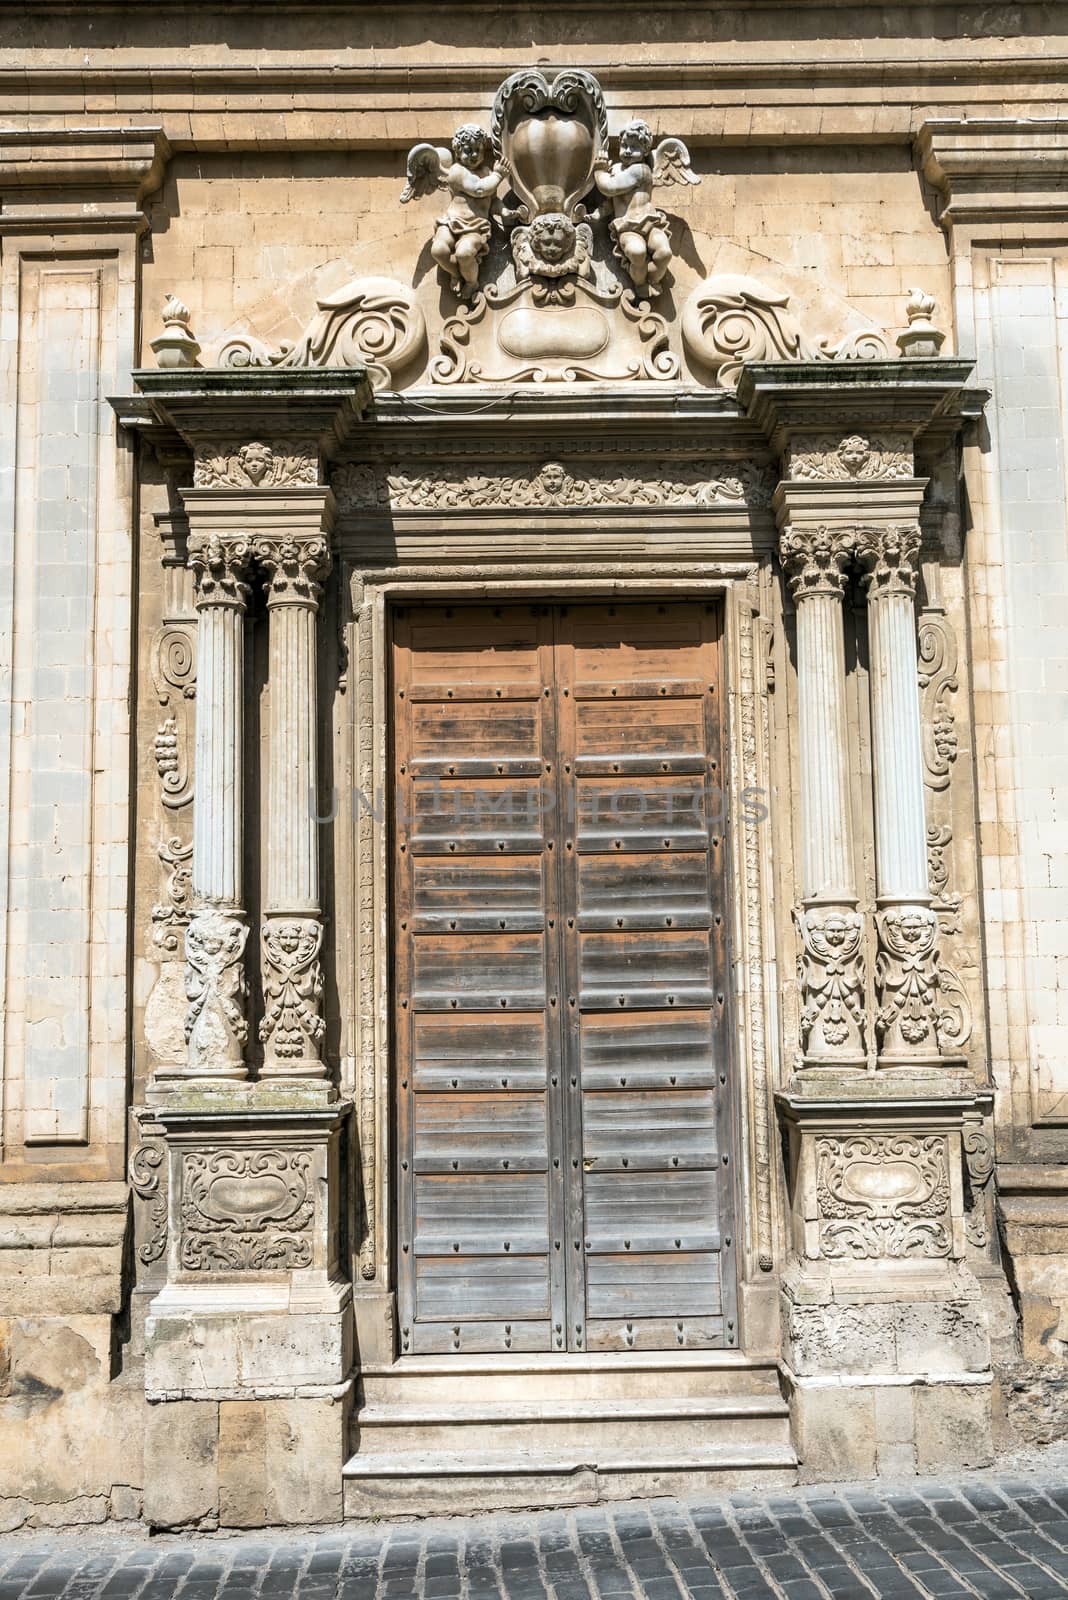 An ornated old door seen on Caltagirone, Sicily